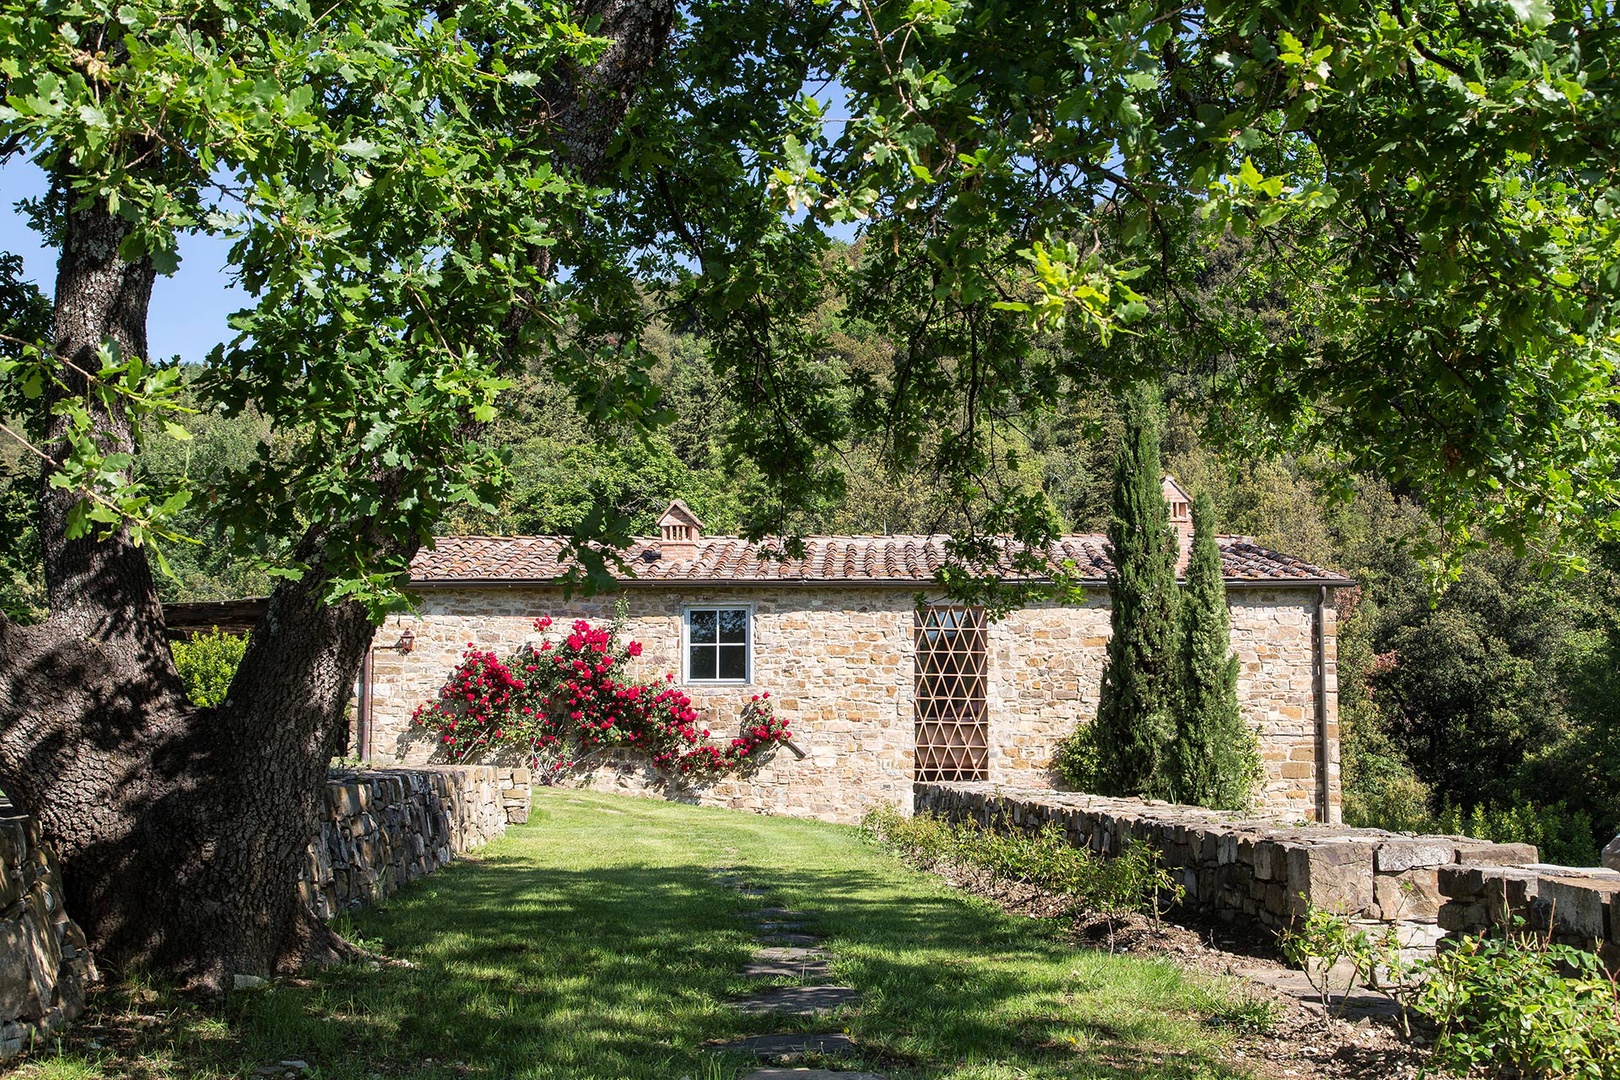 The nearby beautifully converted barn offers 2 bedrooms and 2 bathrooms.